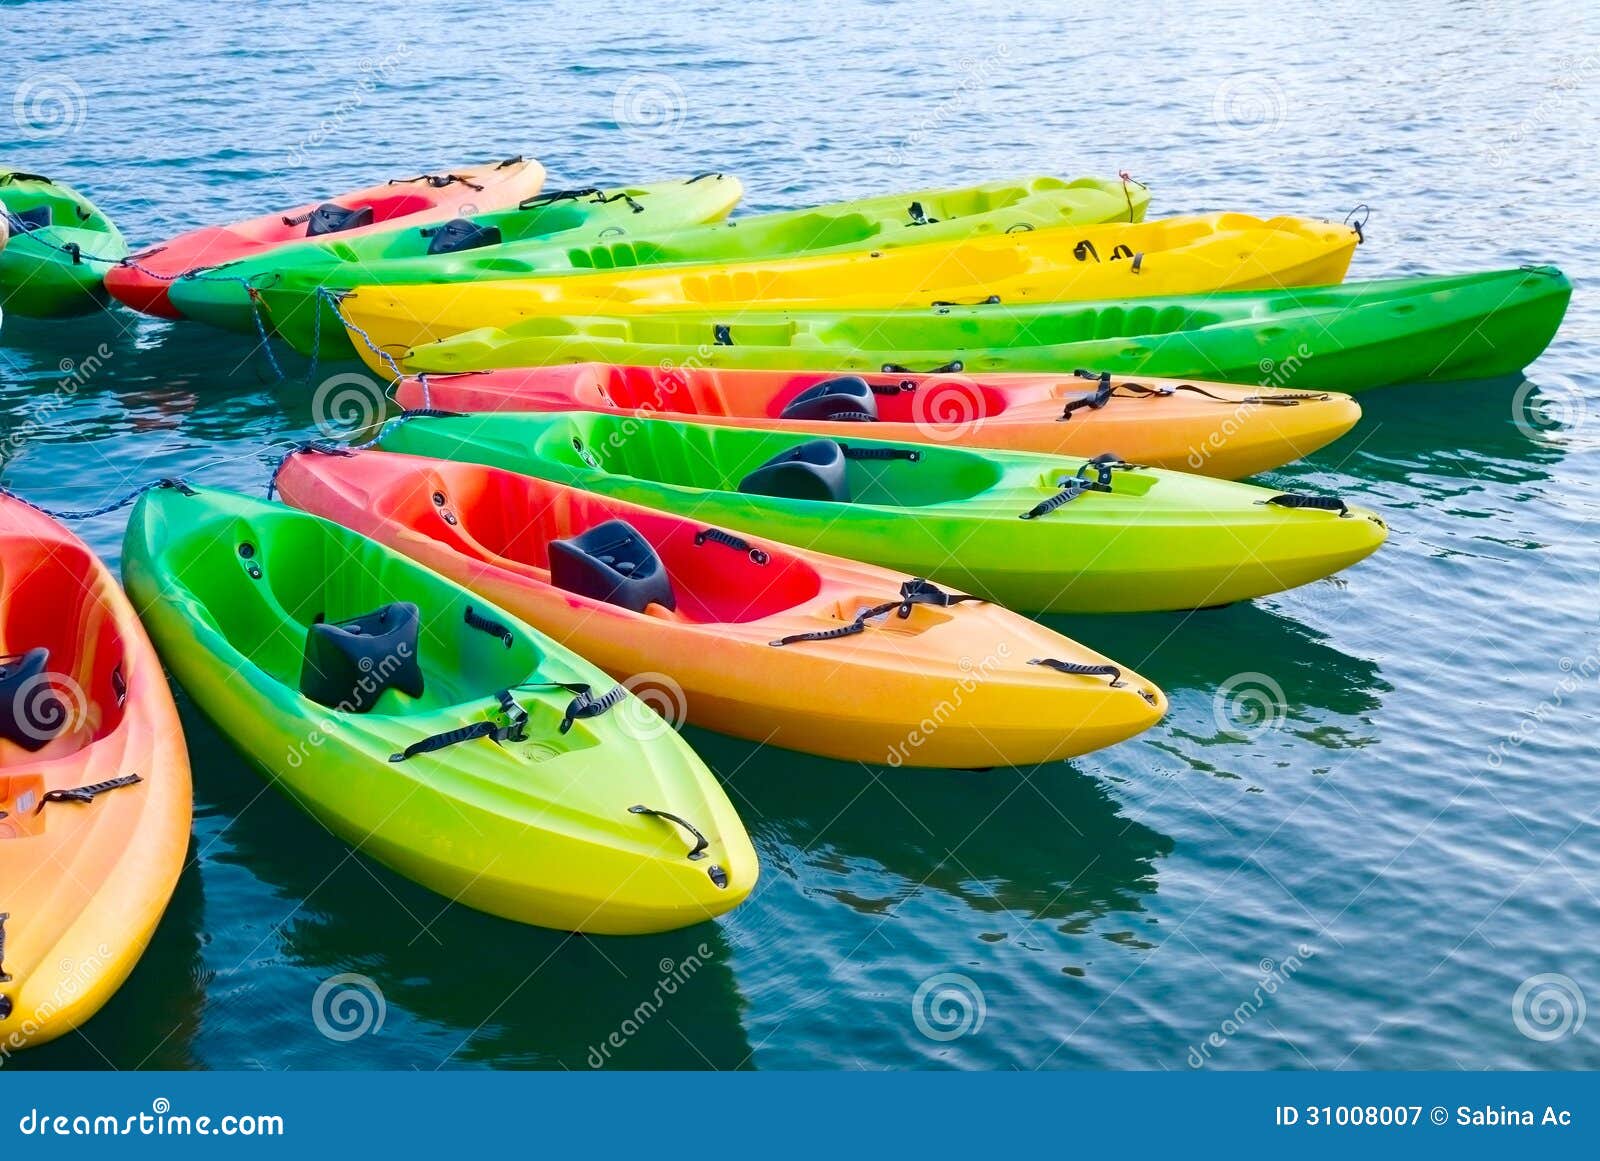 Colorful Kayaks On Water Royalty Free Stock Photography 